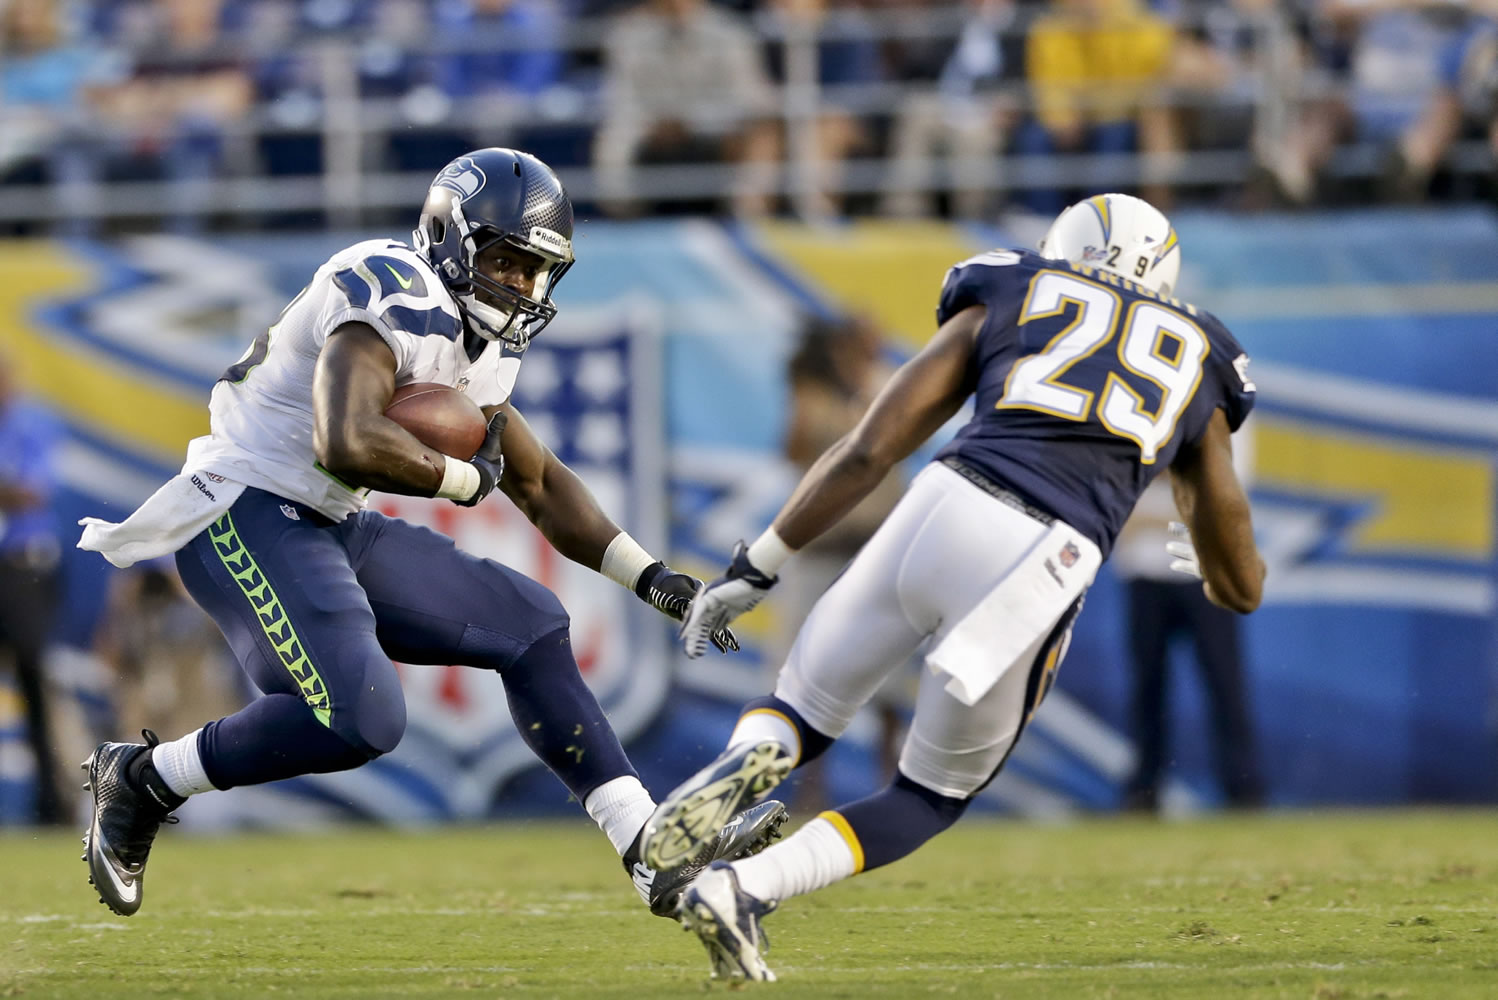 Seattle Seahawks rookie running back Christine Michael puts a move on San Diego Chargers defensive back William Middleton in the second quarter Thursday.